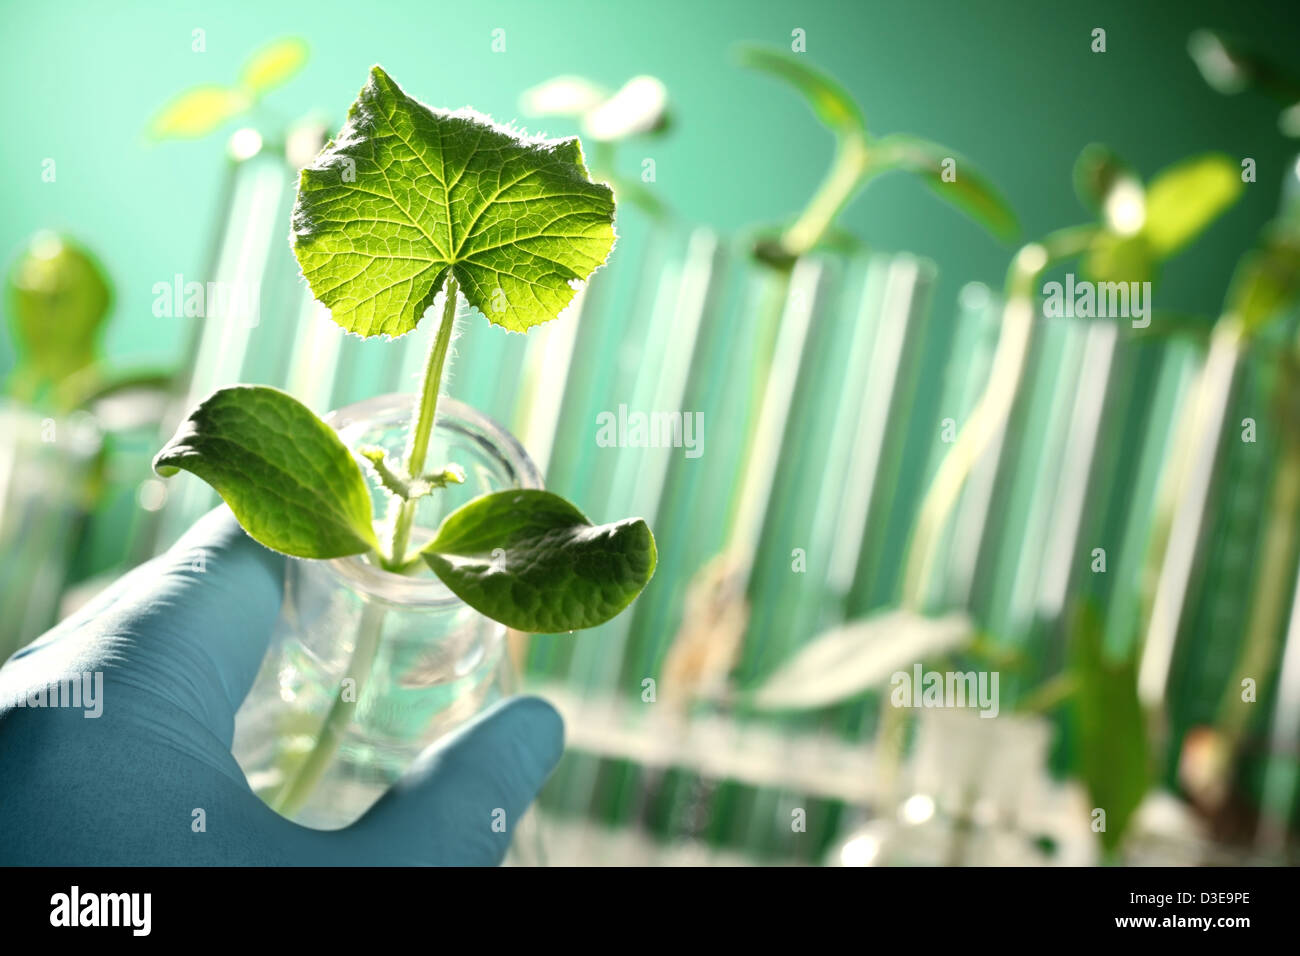 Hand in glove holding a test tube with plant Stock Photo